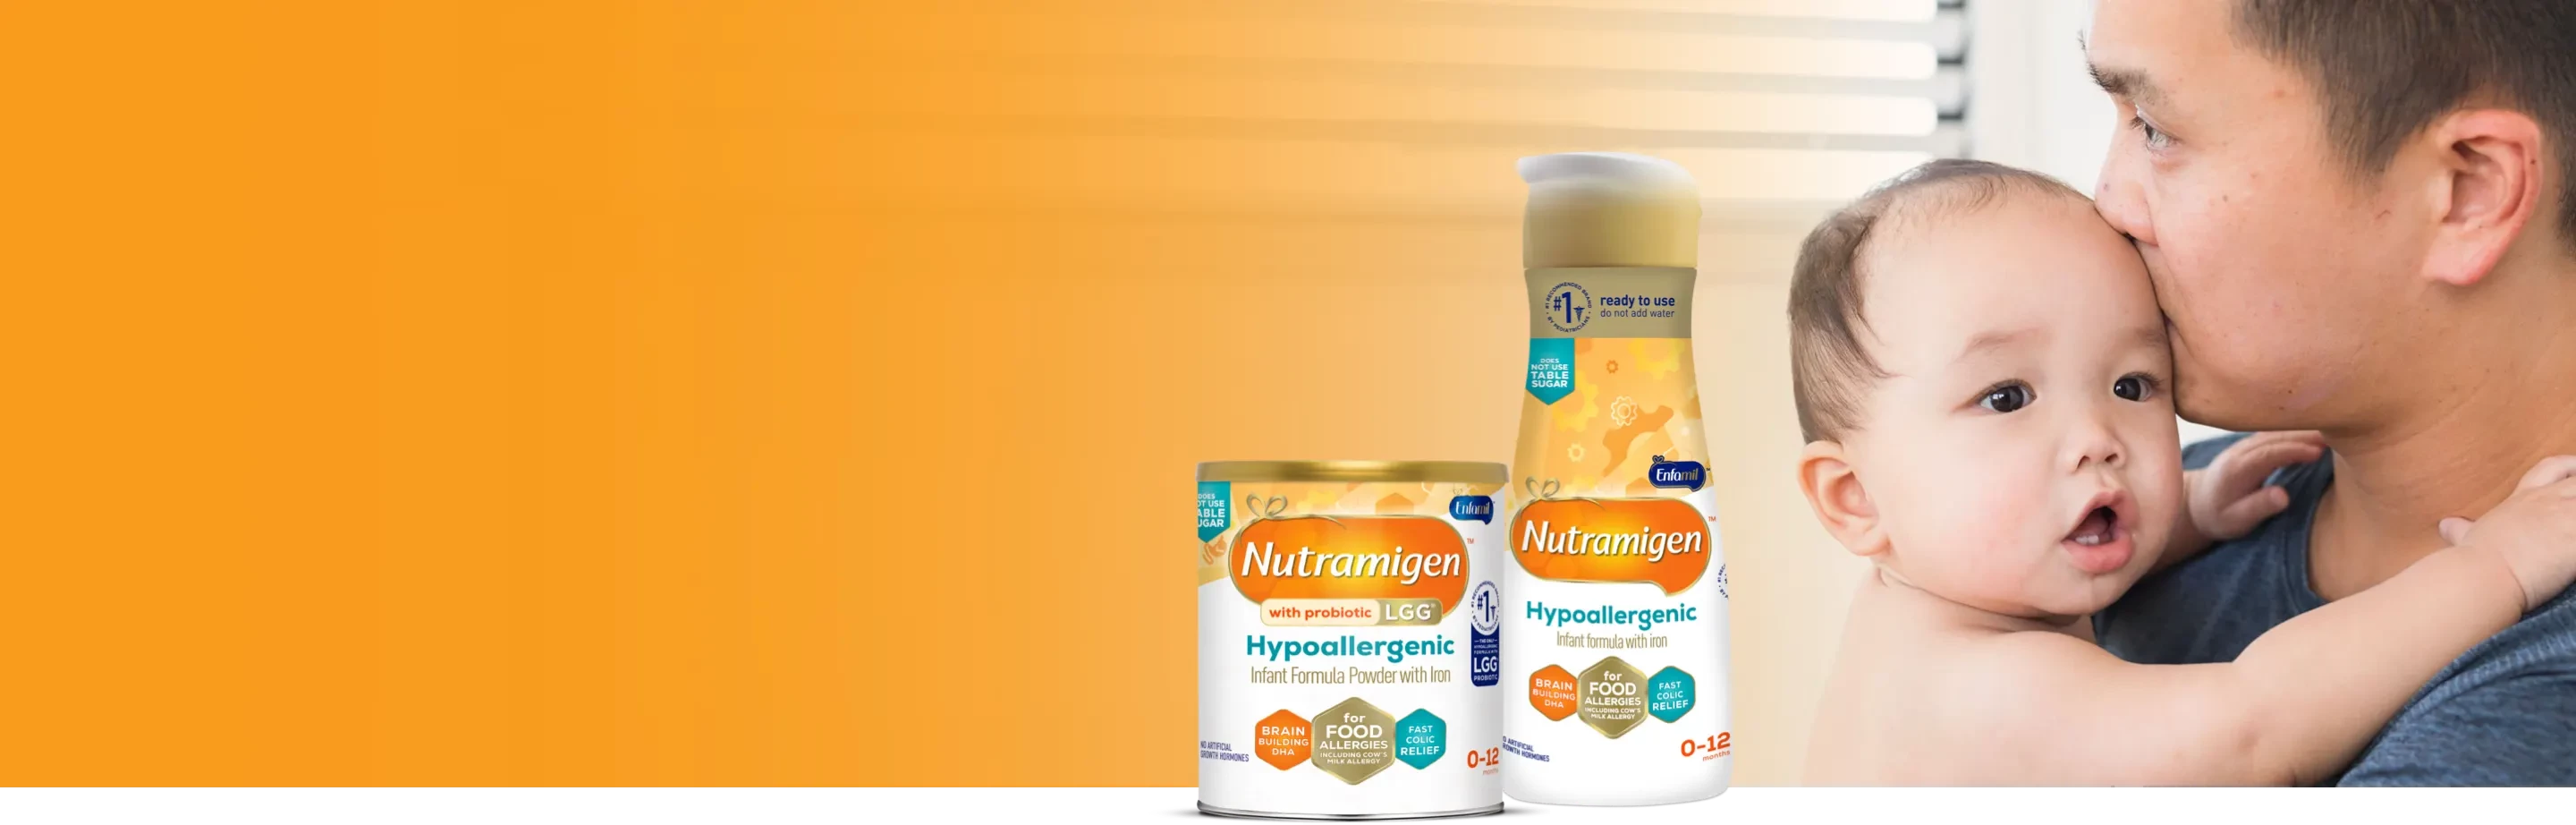 Dad kissing baby on the forehead, Nutramigen® product lineup